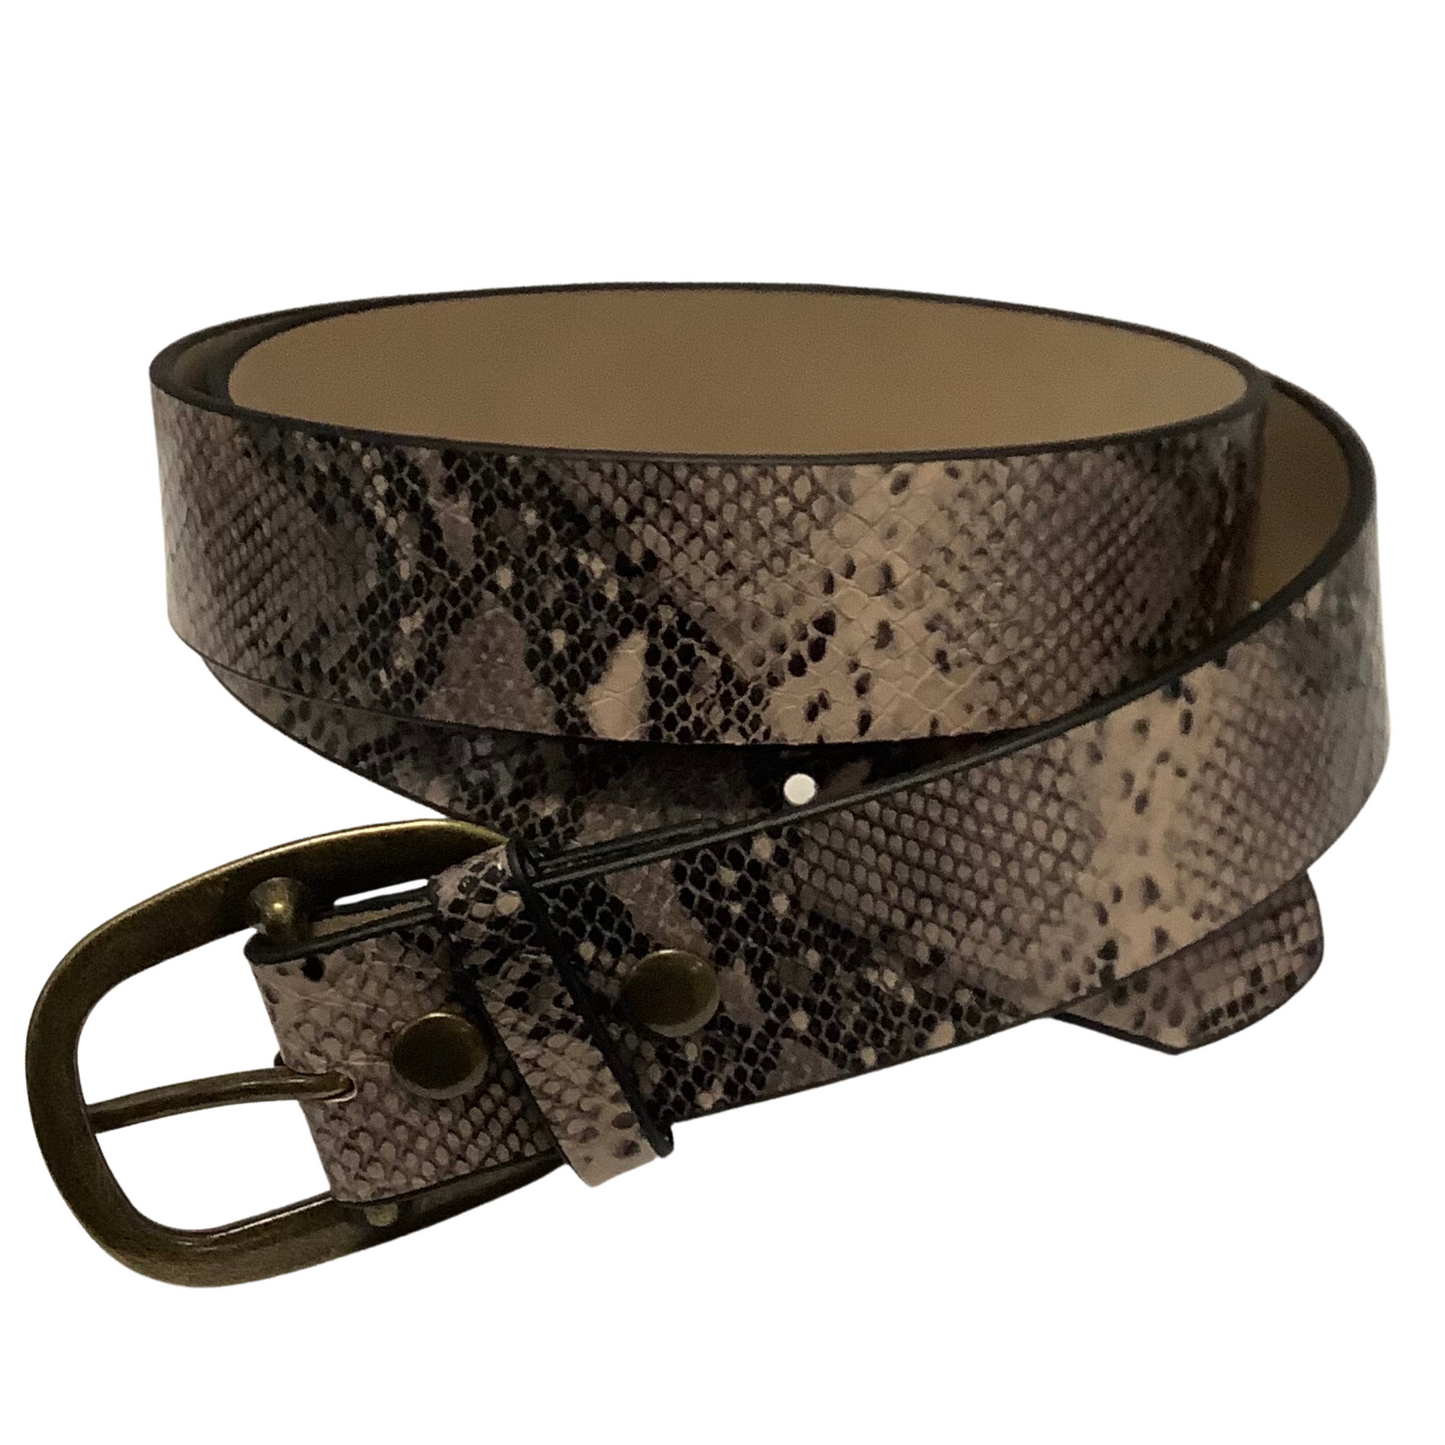 This neutral-tone Brown Snake Belt is crafted from high-quality leather and features a unique, brown snake print design, a stylish brass buckle, and a timeless look that will never go out of style. It's the perfect accessory to add subtle flair to any outfit.